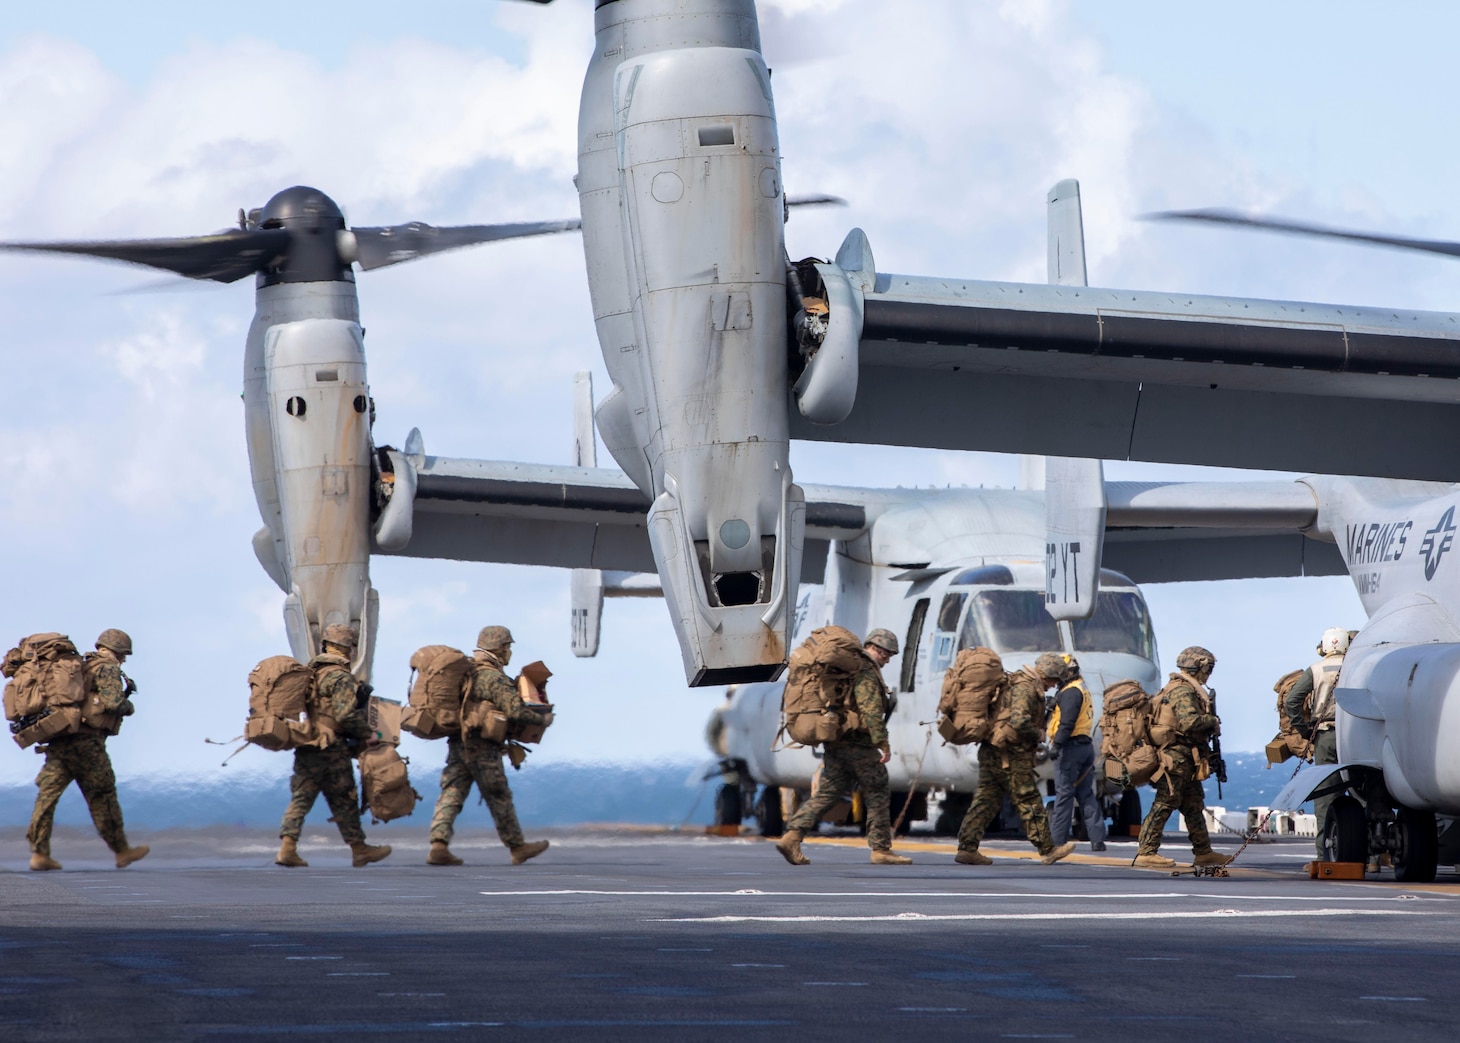 U.S. Marines with 15th Marine Expeditionary Unit board an MV-22 Osprey, assigned to Marine Medium Tiltrotor Squadron 164 (Reinforced), 15th MEU, prior to departing the amphibious assault ship USS Makin Island (LHD 8) in support of Northern Edge 2021.